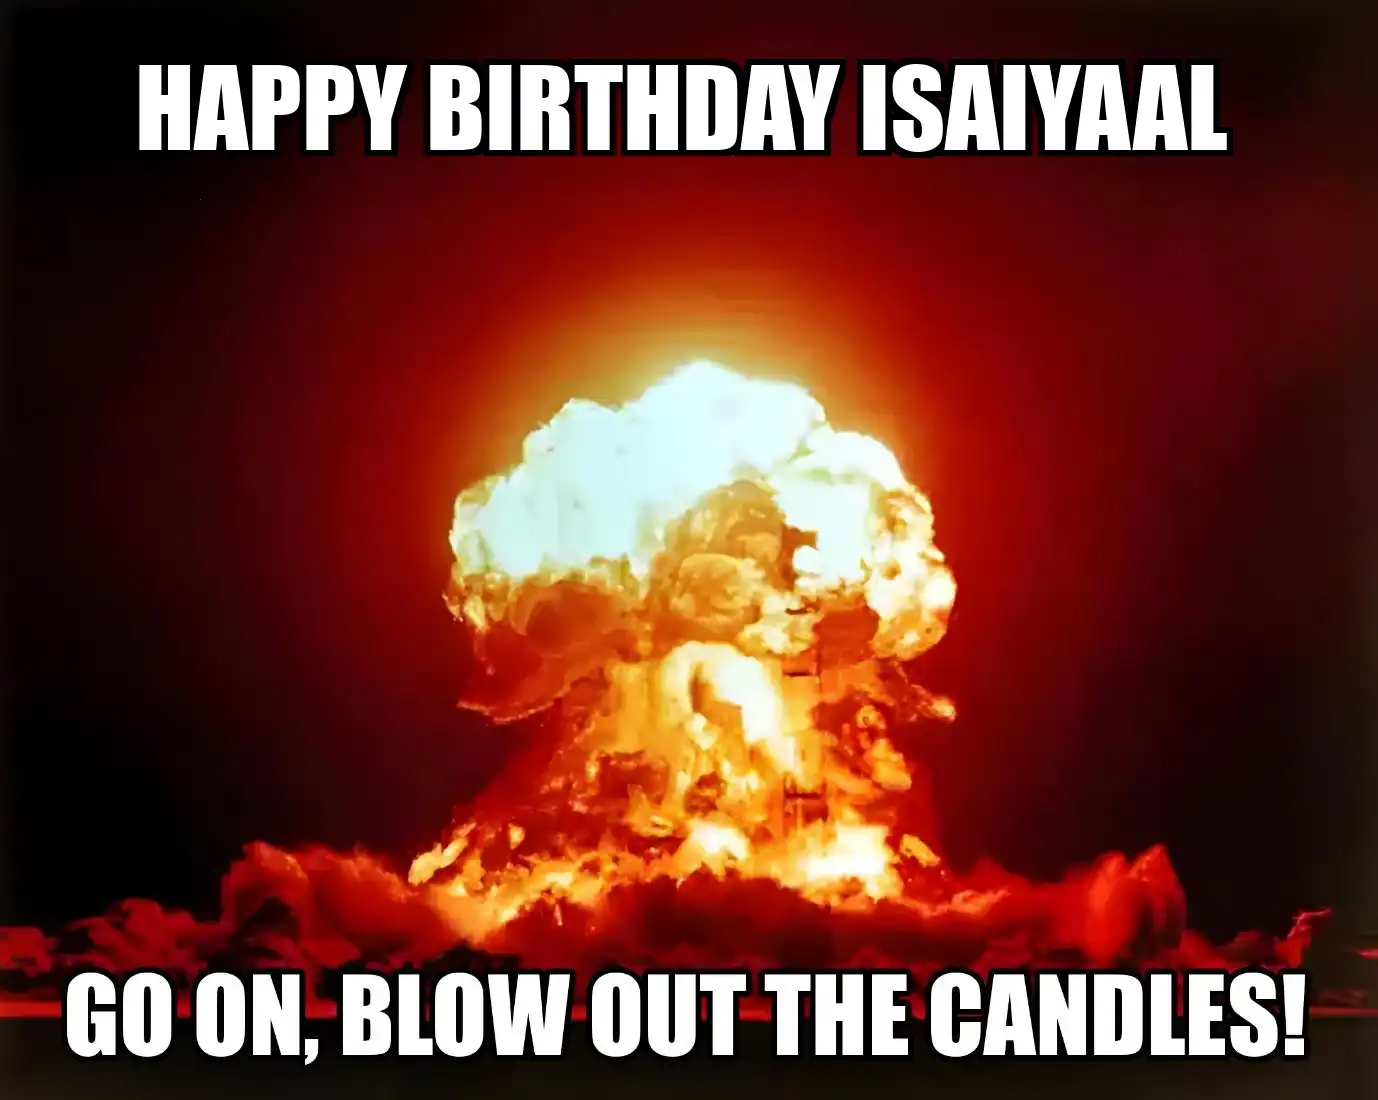 Happy Birthday Isaiyaal Go On Blow Out The Candles Meme